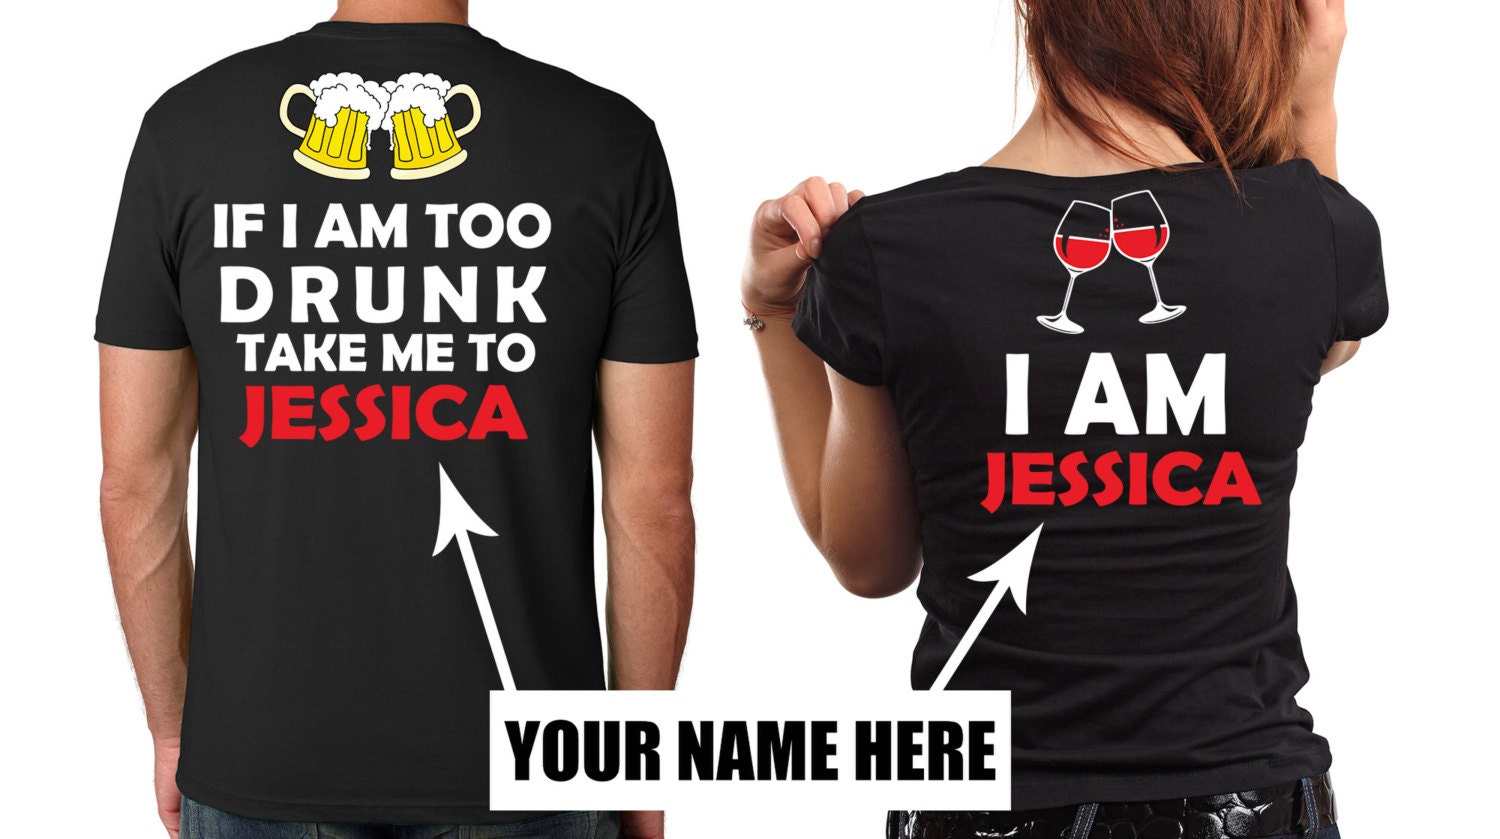 Jessica will You be my girlfriend funny' Men's T-Shirt